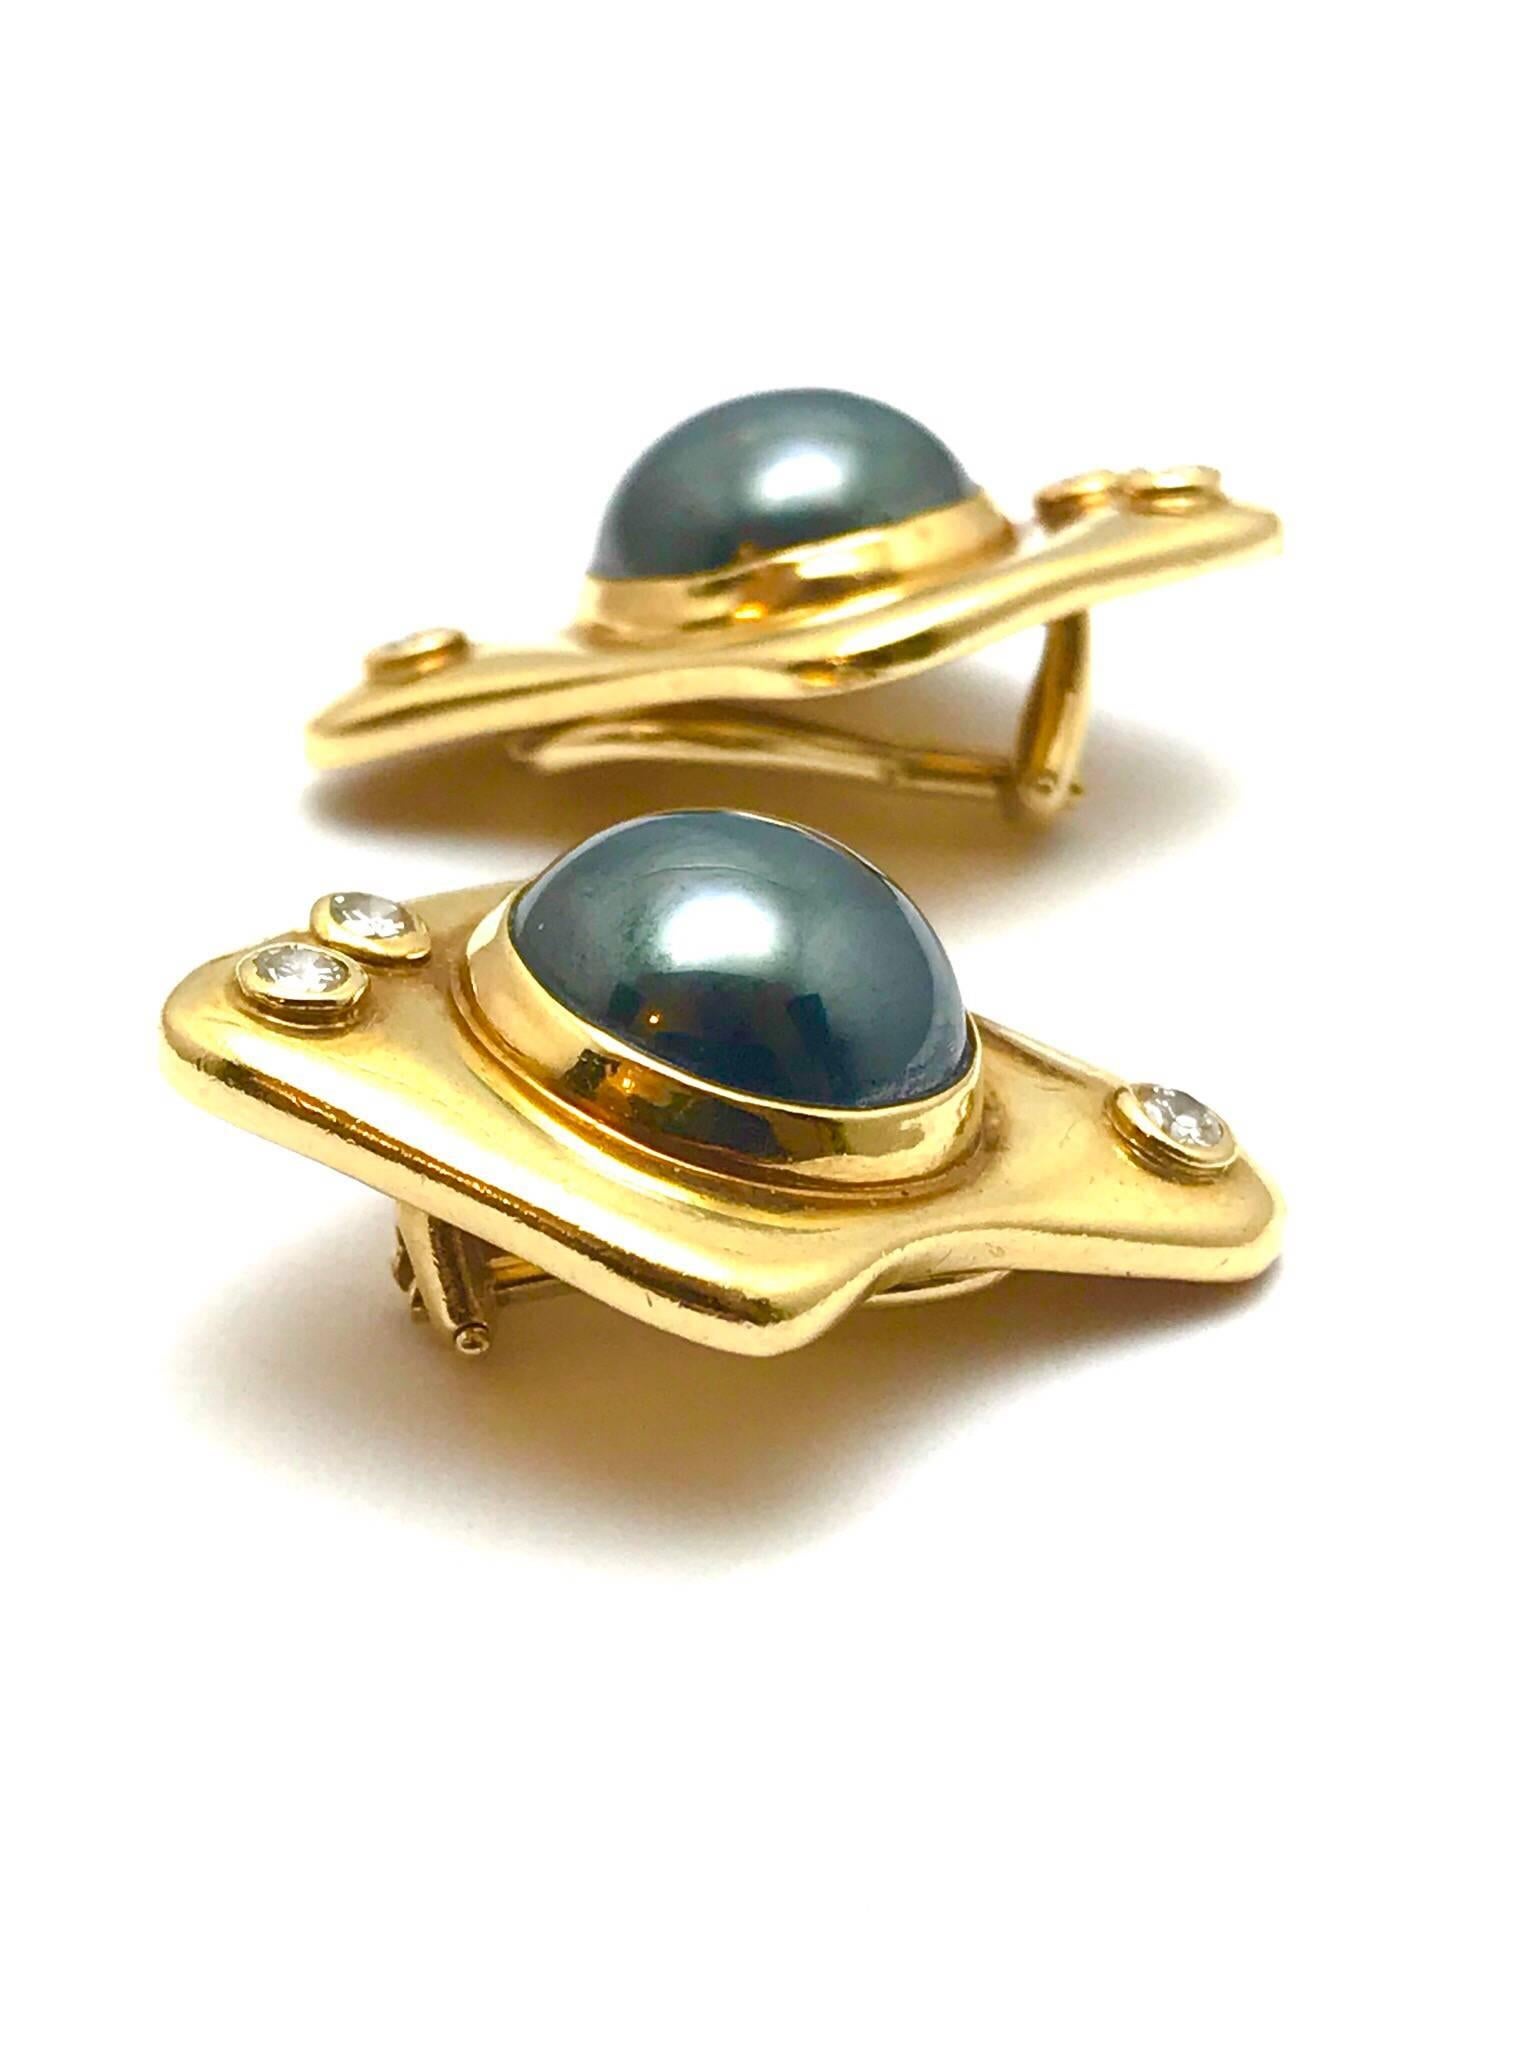 A pair of round diamond and cabochon hematite free form 14 karat yellow gold clip earrings.  the hematite is bezel set in the center, with two diamonds at the bottom of the earrings, and one diamond at the top.  There are six diamonds in total with